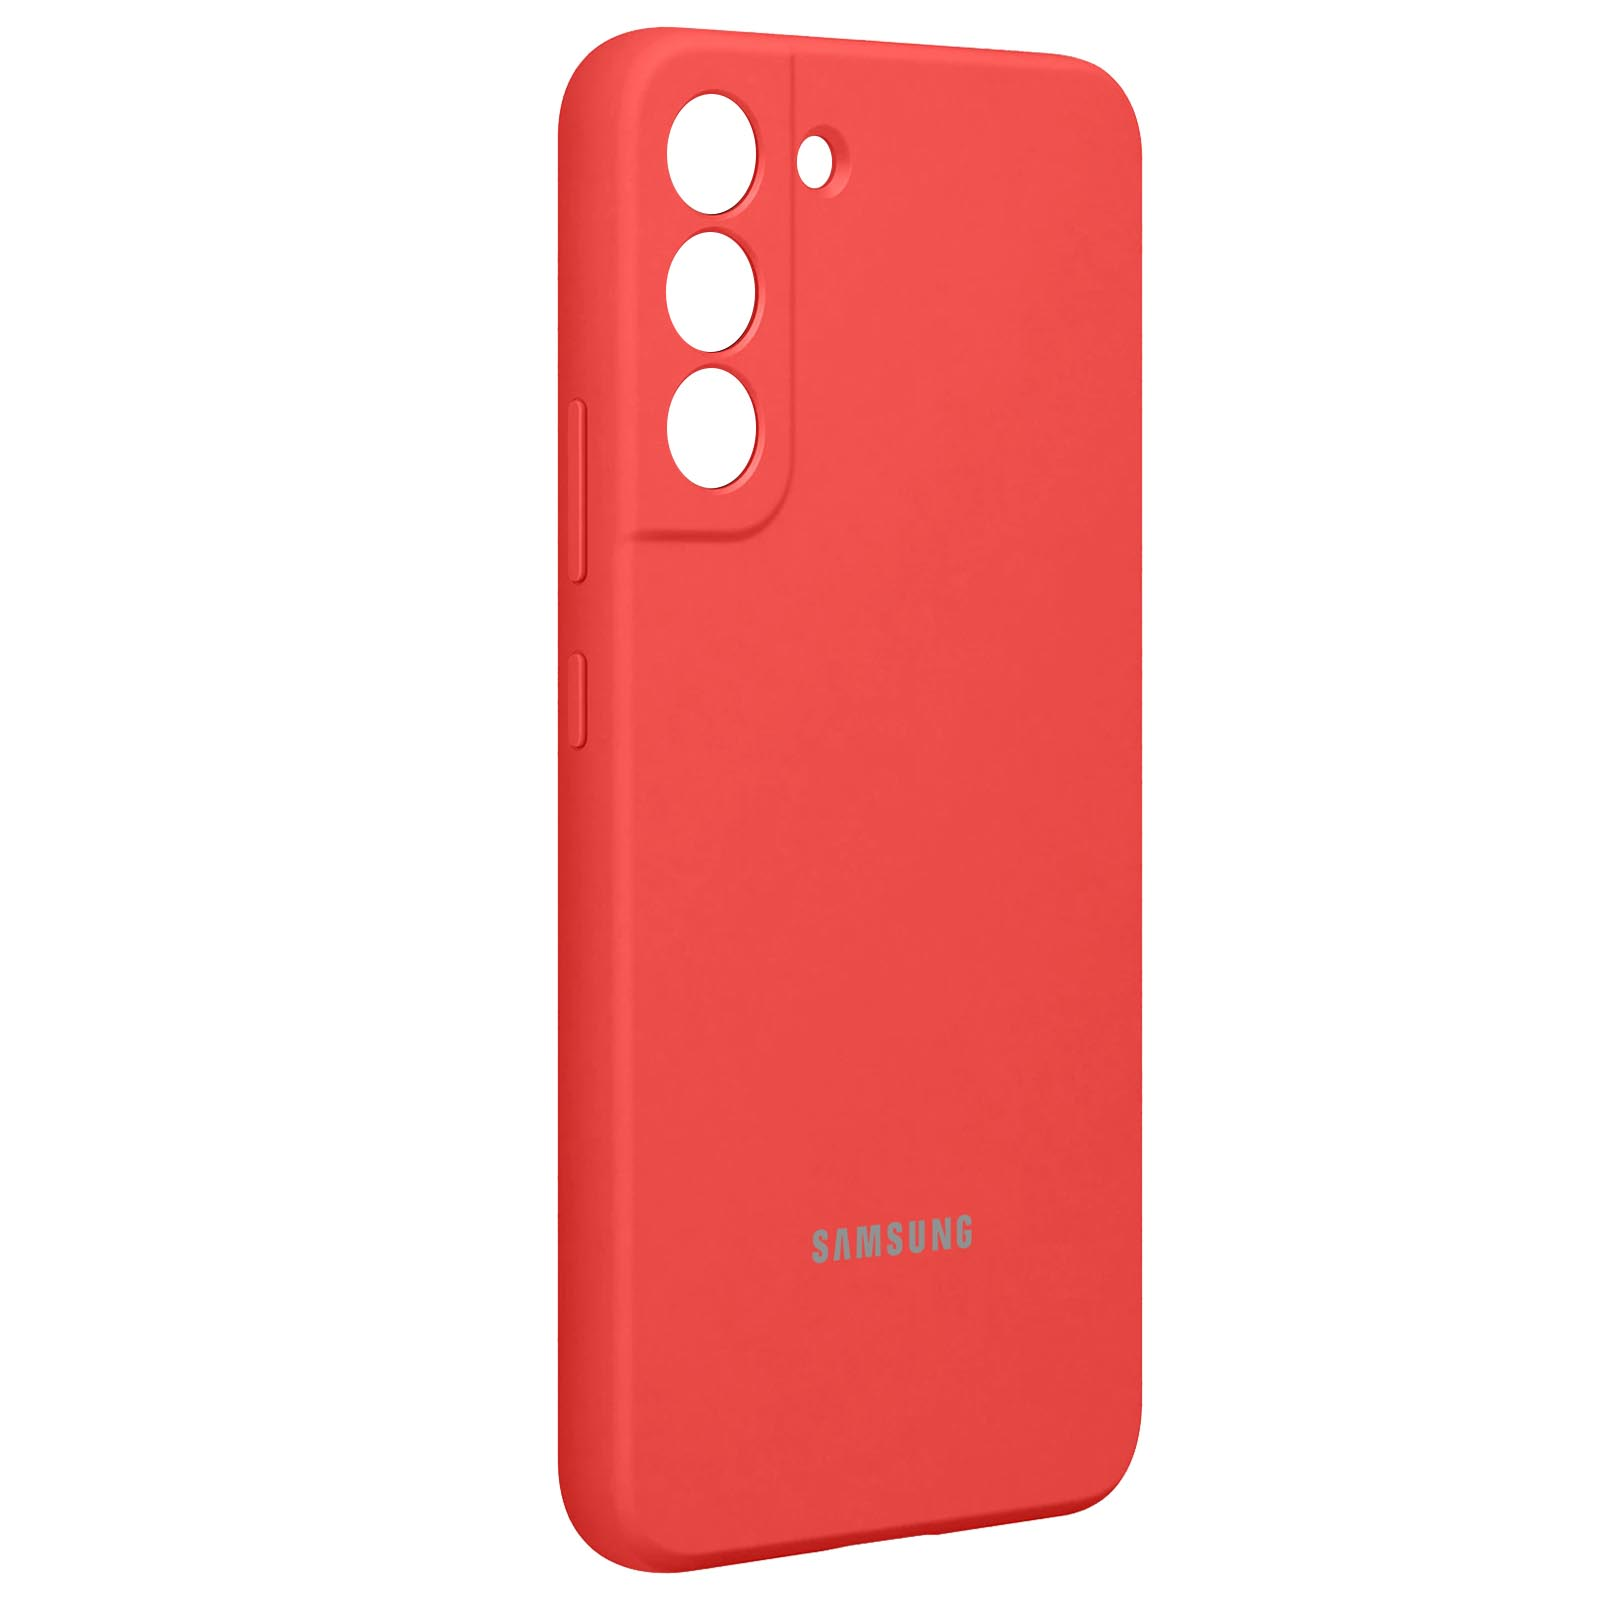 Plus, Backcover, Silicone SAMSUNG Cover S22 Samsung, Korallenrot Galaxy Series,